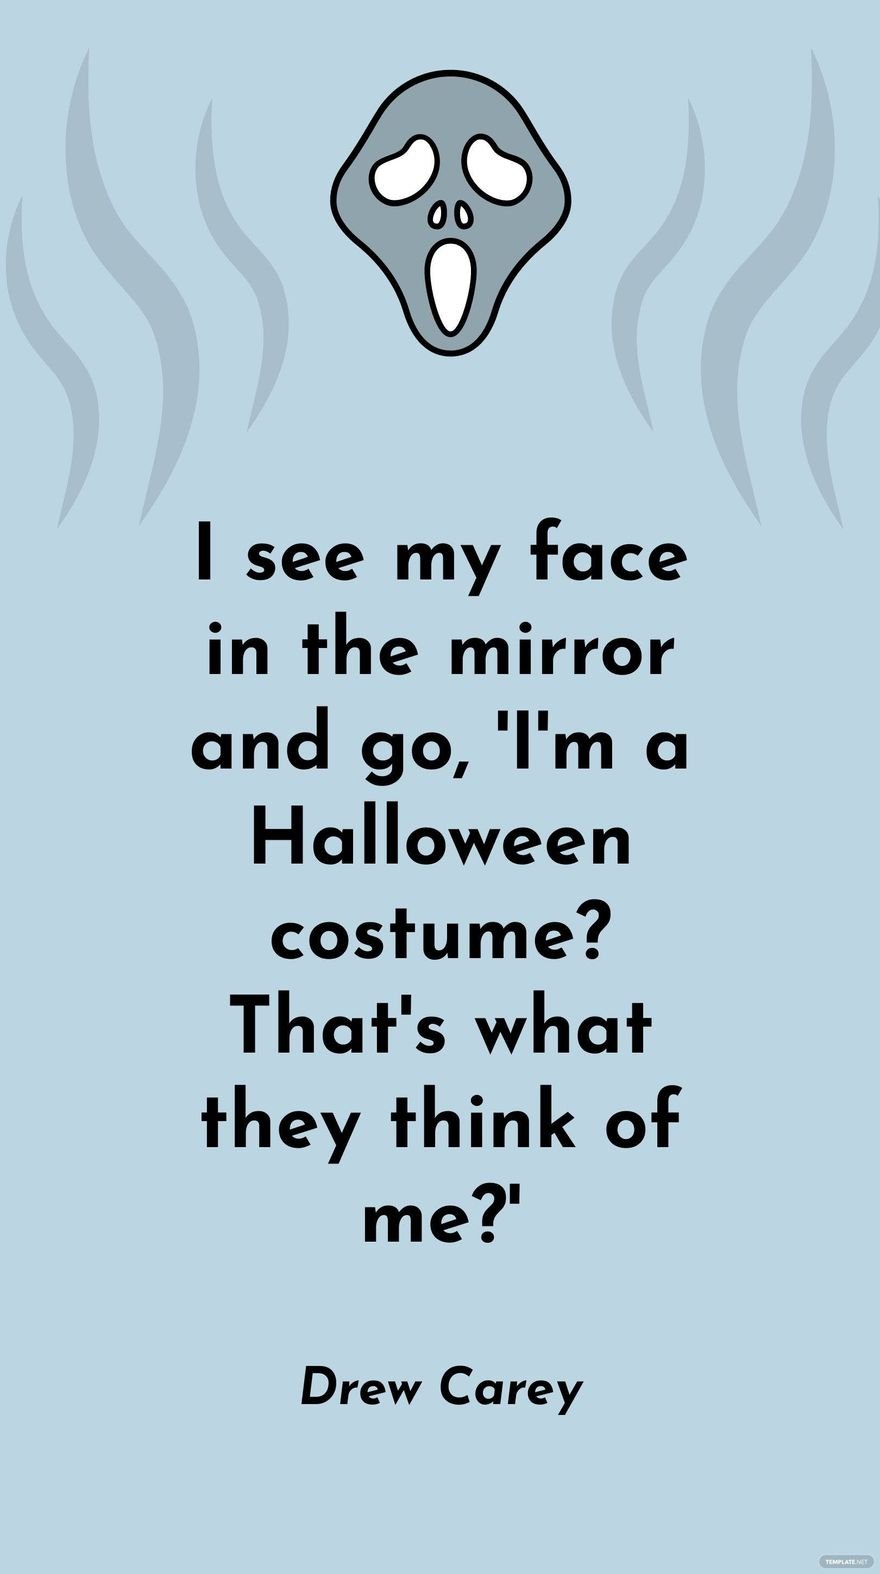 Drew Carey - I see my face in the mirror and go, 'I'm a Halloween costume? That's what they think of me?'